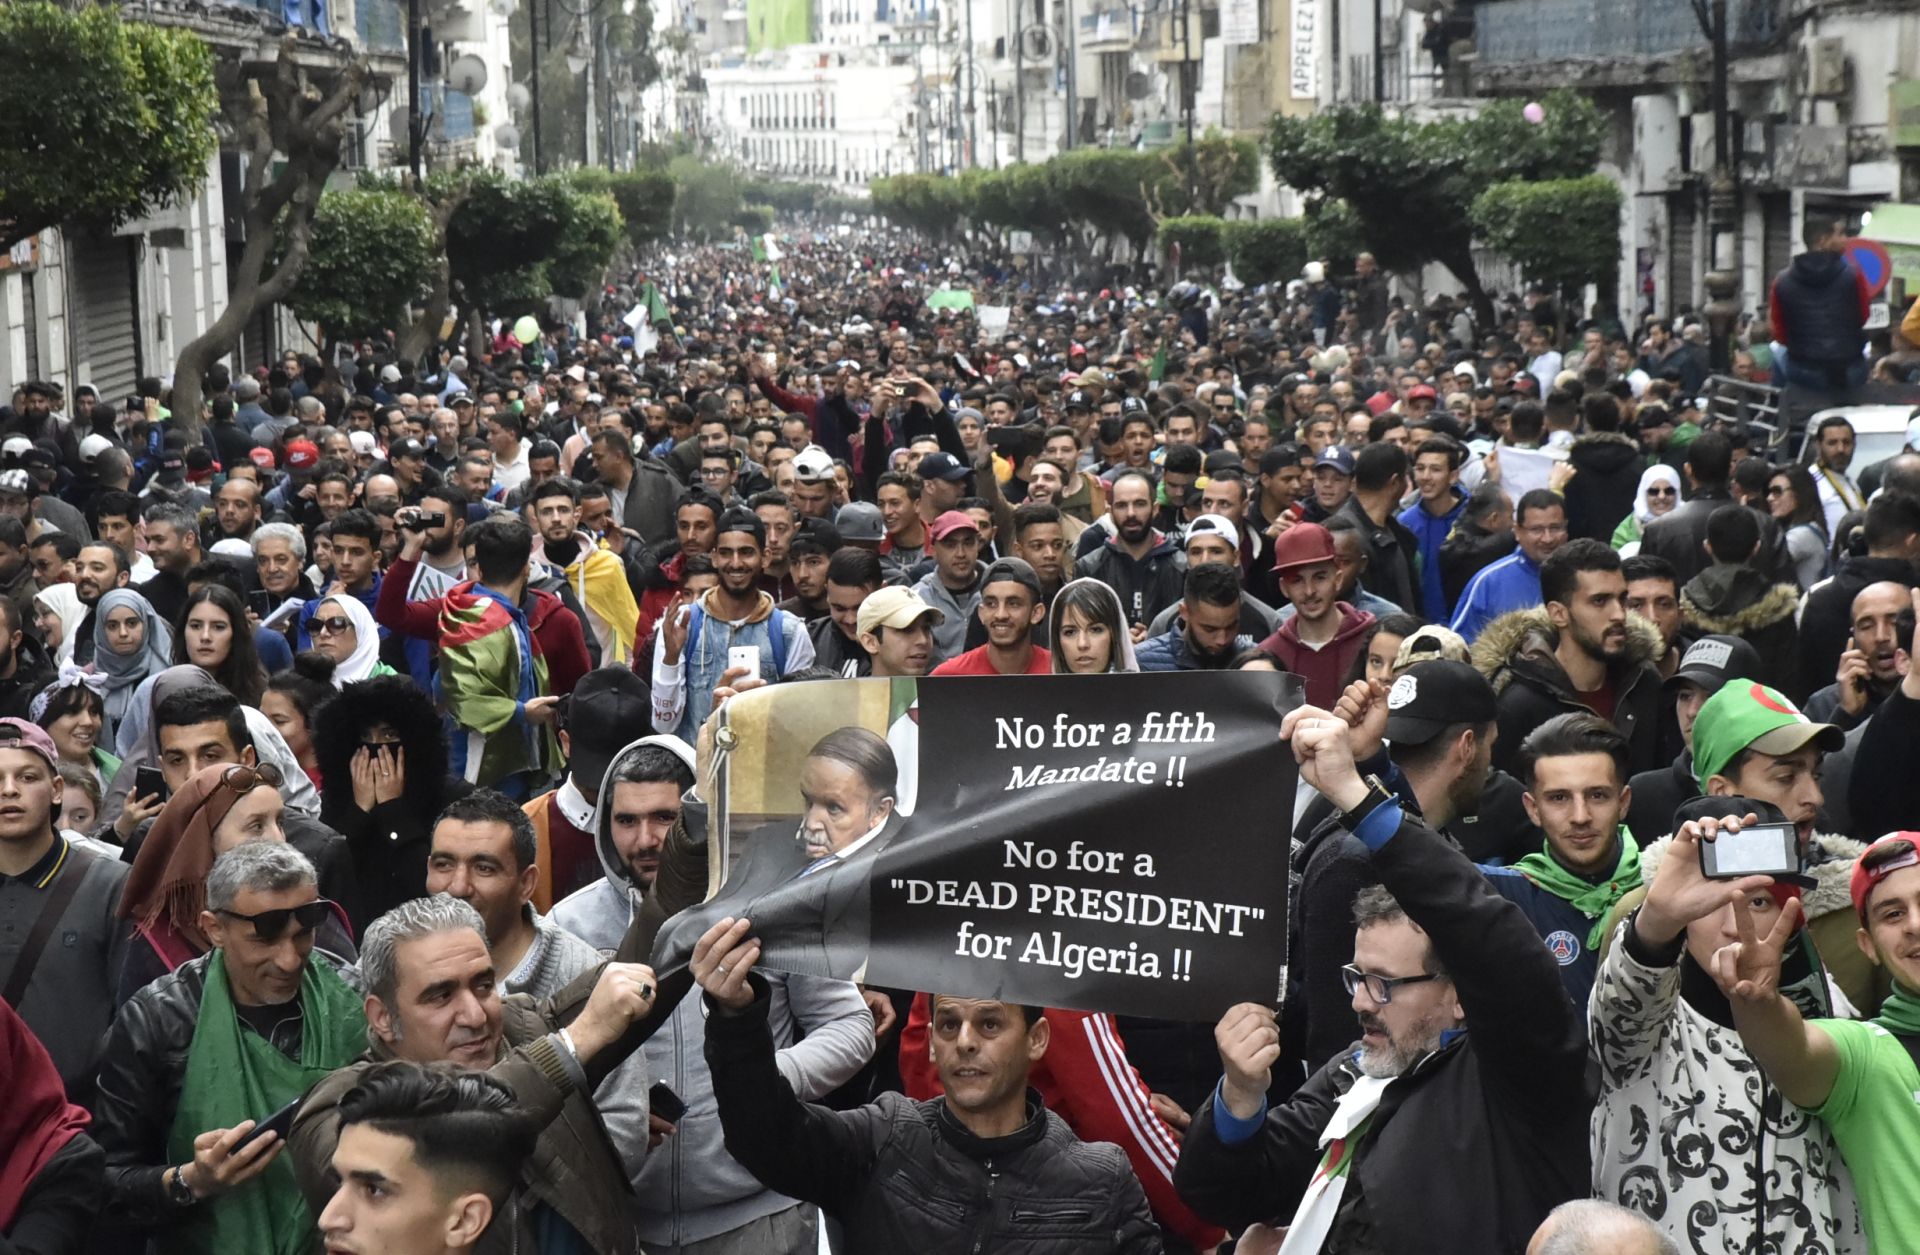 Algerian protesters demonstrate in the capital Algiers against ailing President Abdel Aziz Bouteflika's bid for a fifth term on March 8, 2019.